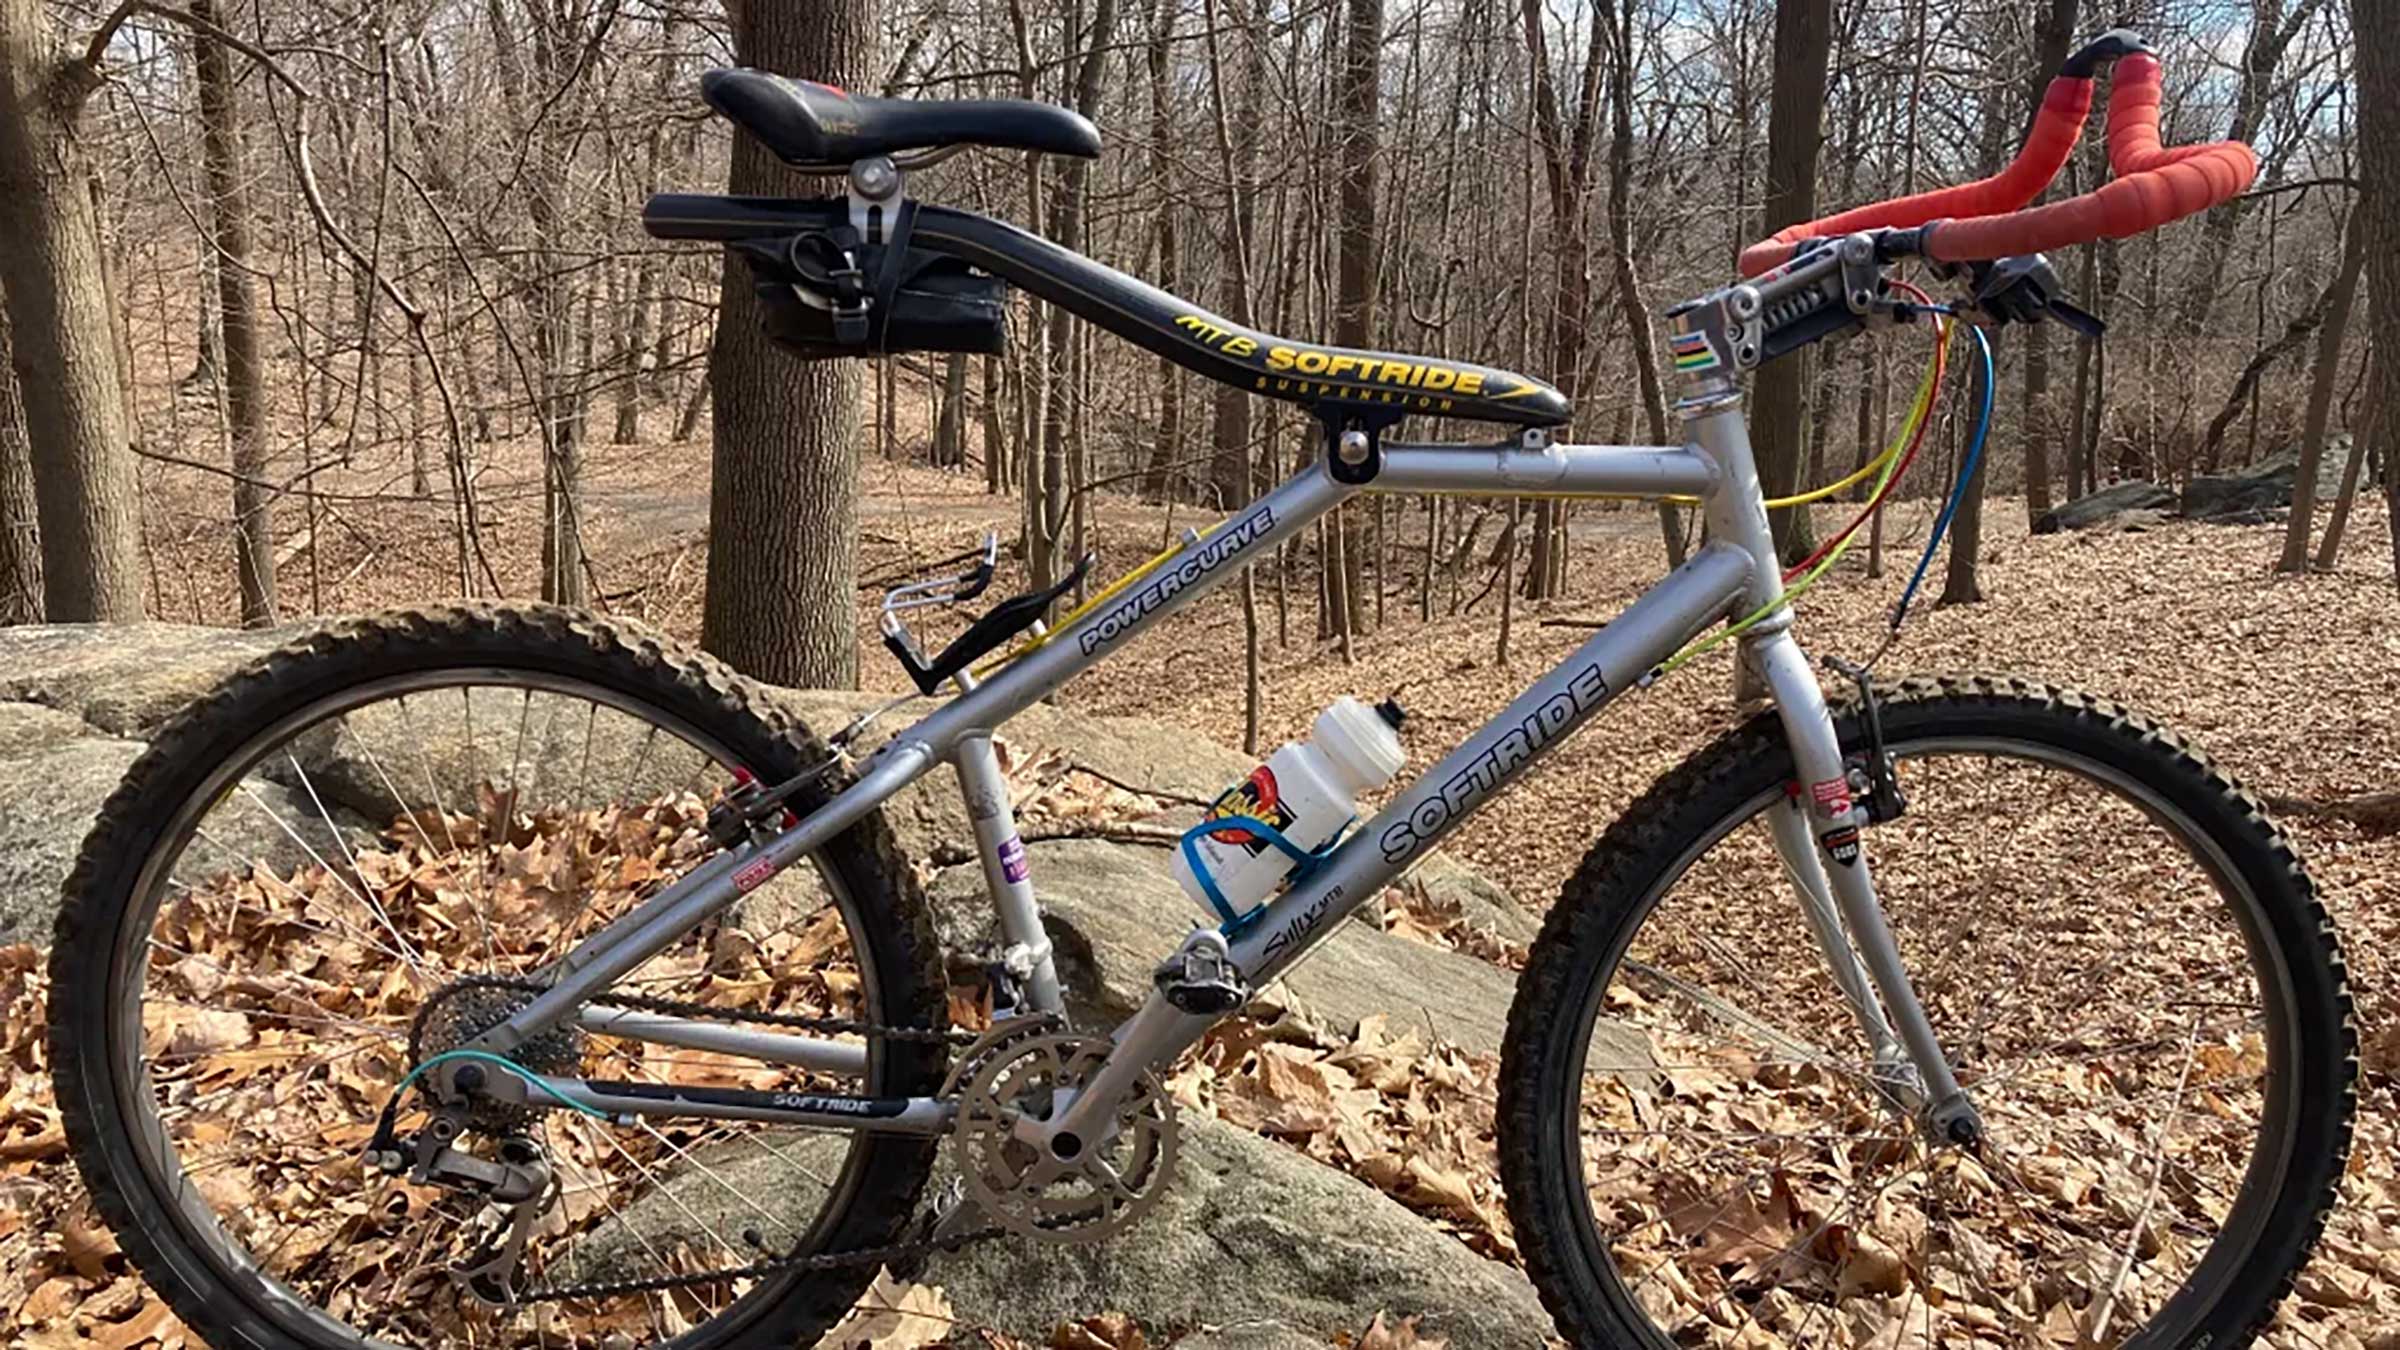 Lessons Learned from Riding a 30-Year-Old Mountain Bike